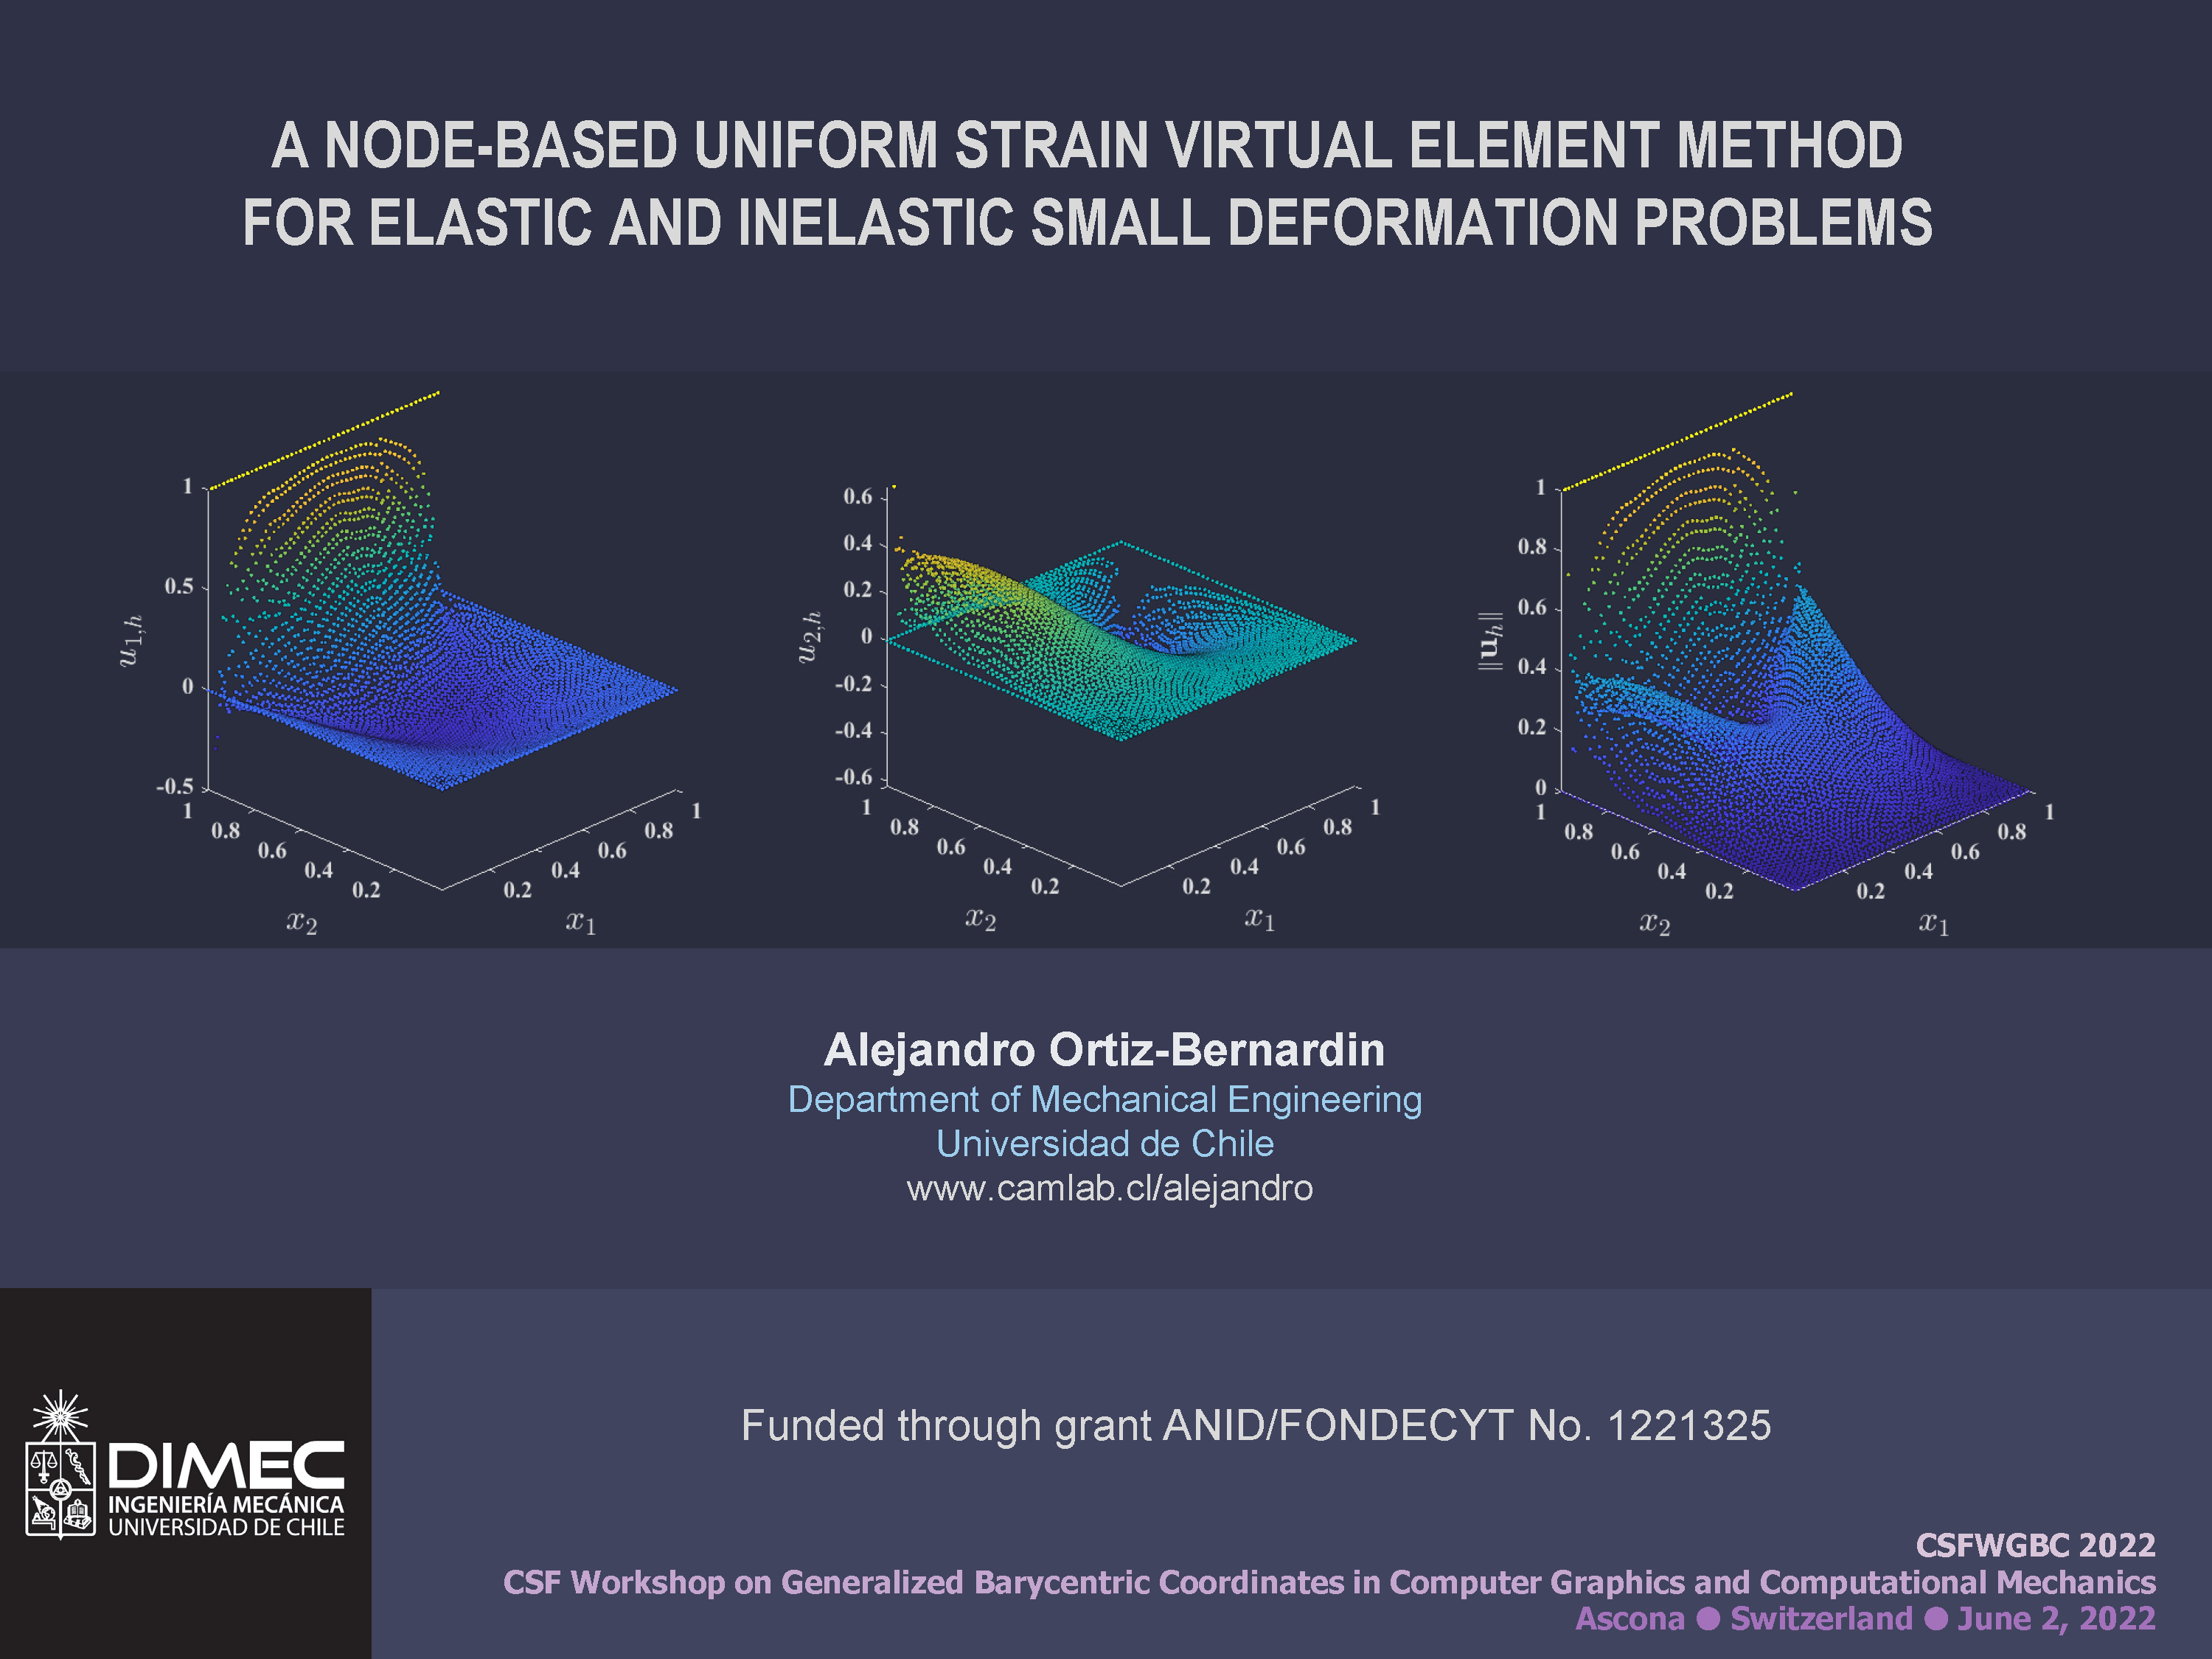 A Node-Based Uniform Strain Virtual Element Method for Elastic and Inelastic Small Deformation Problems